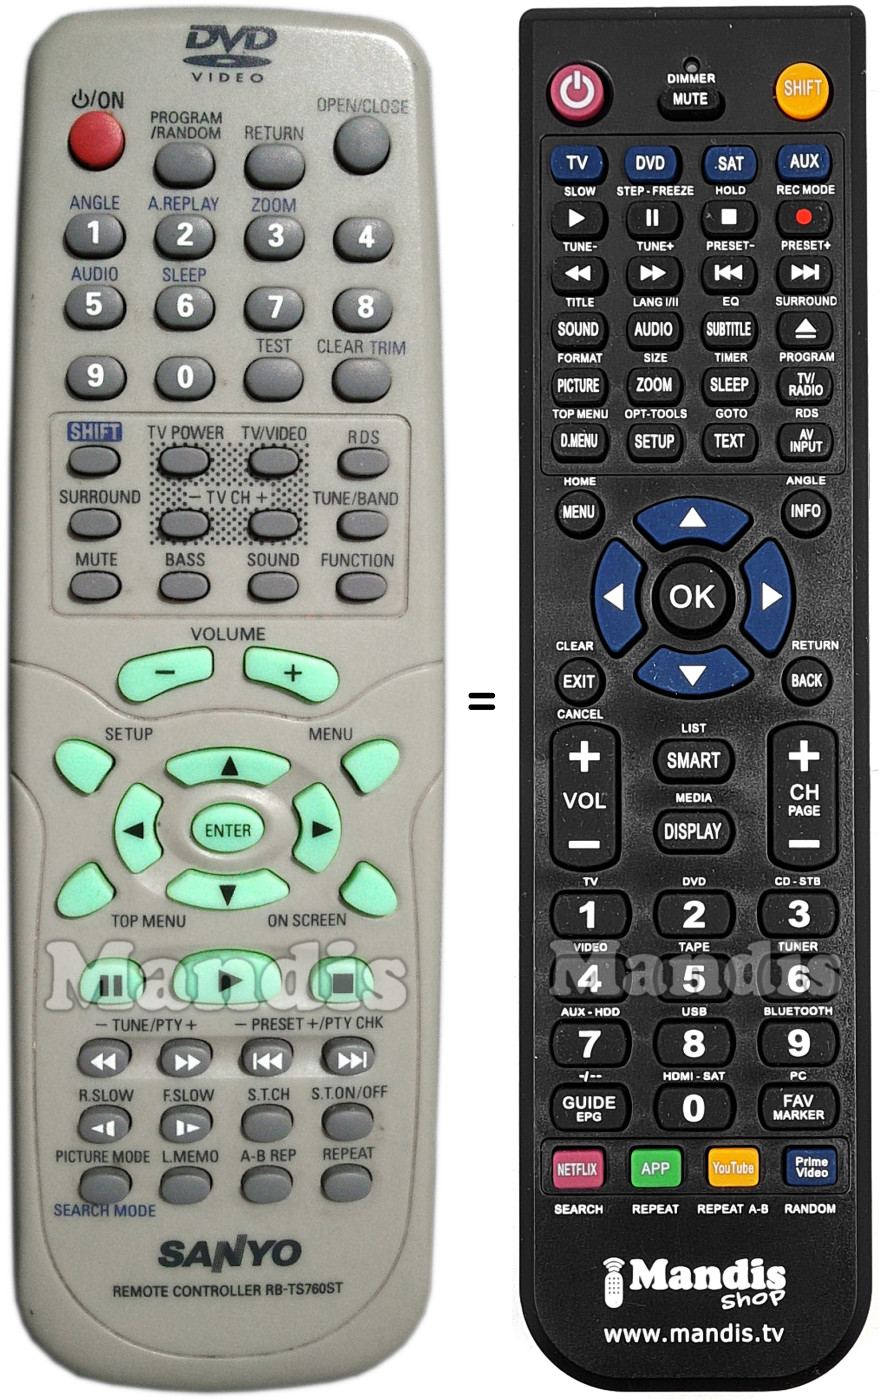 Replacement remote control Sanyo RB-TS760ST